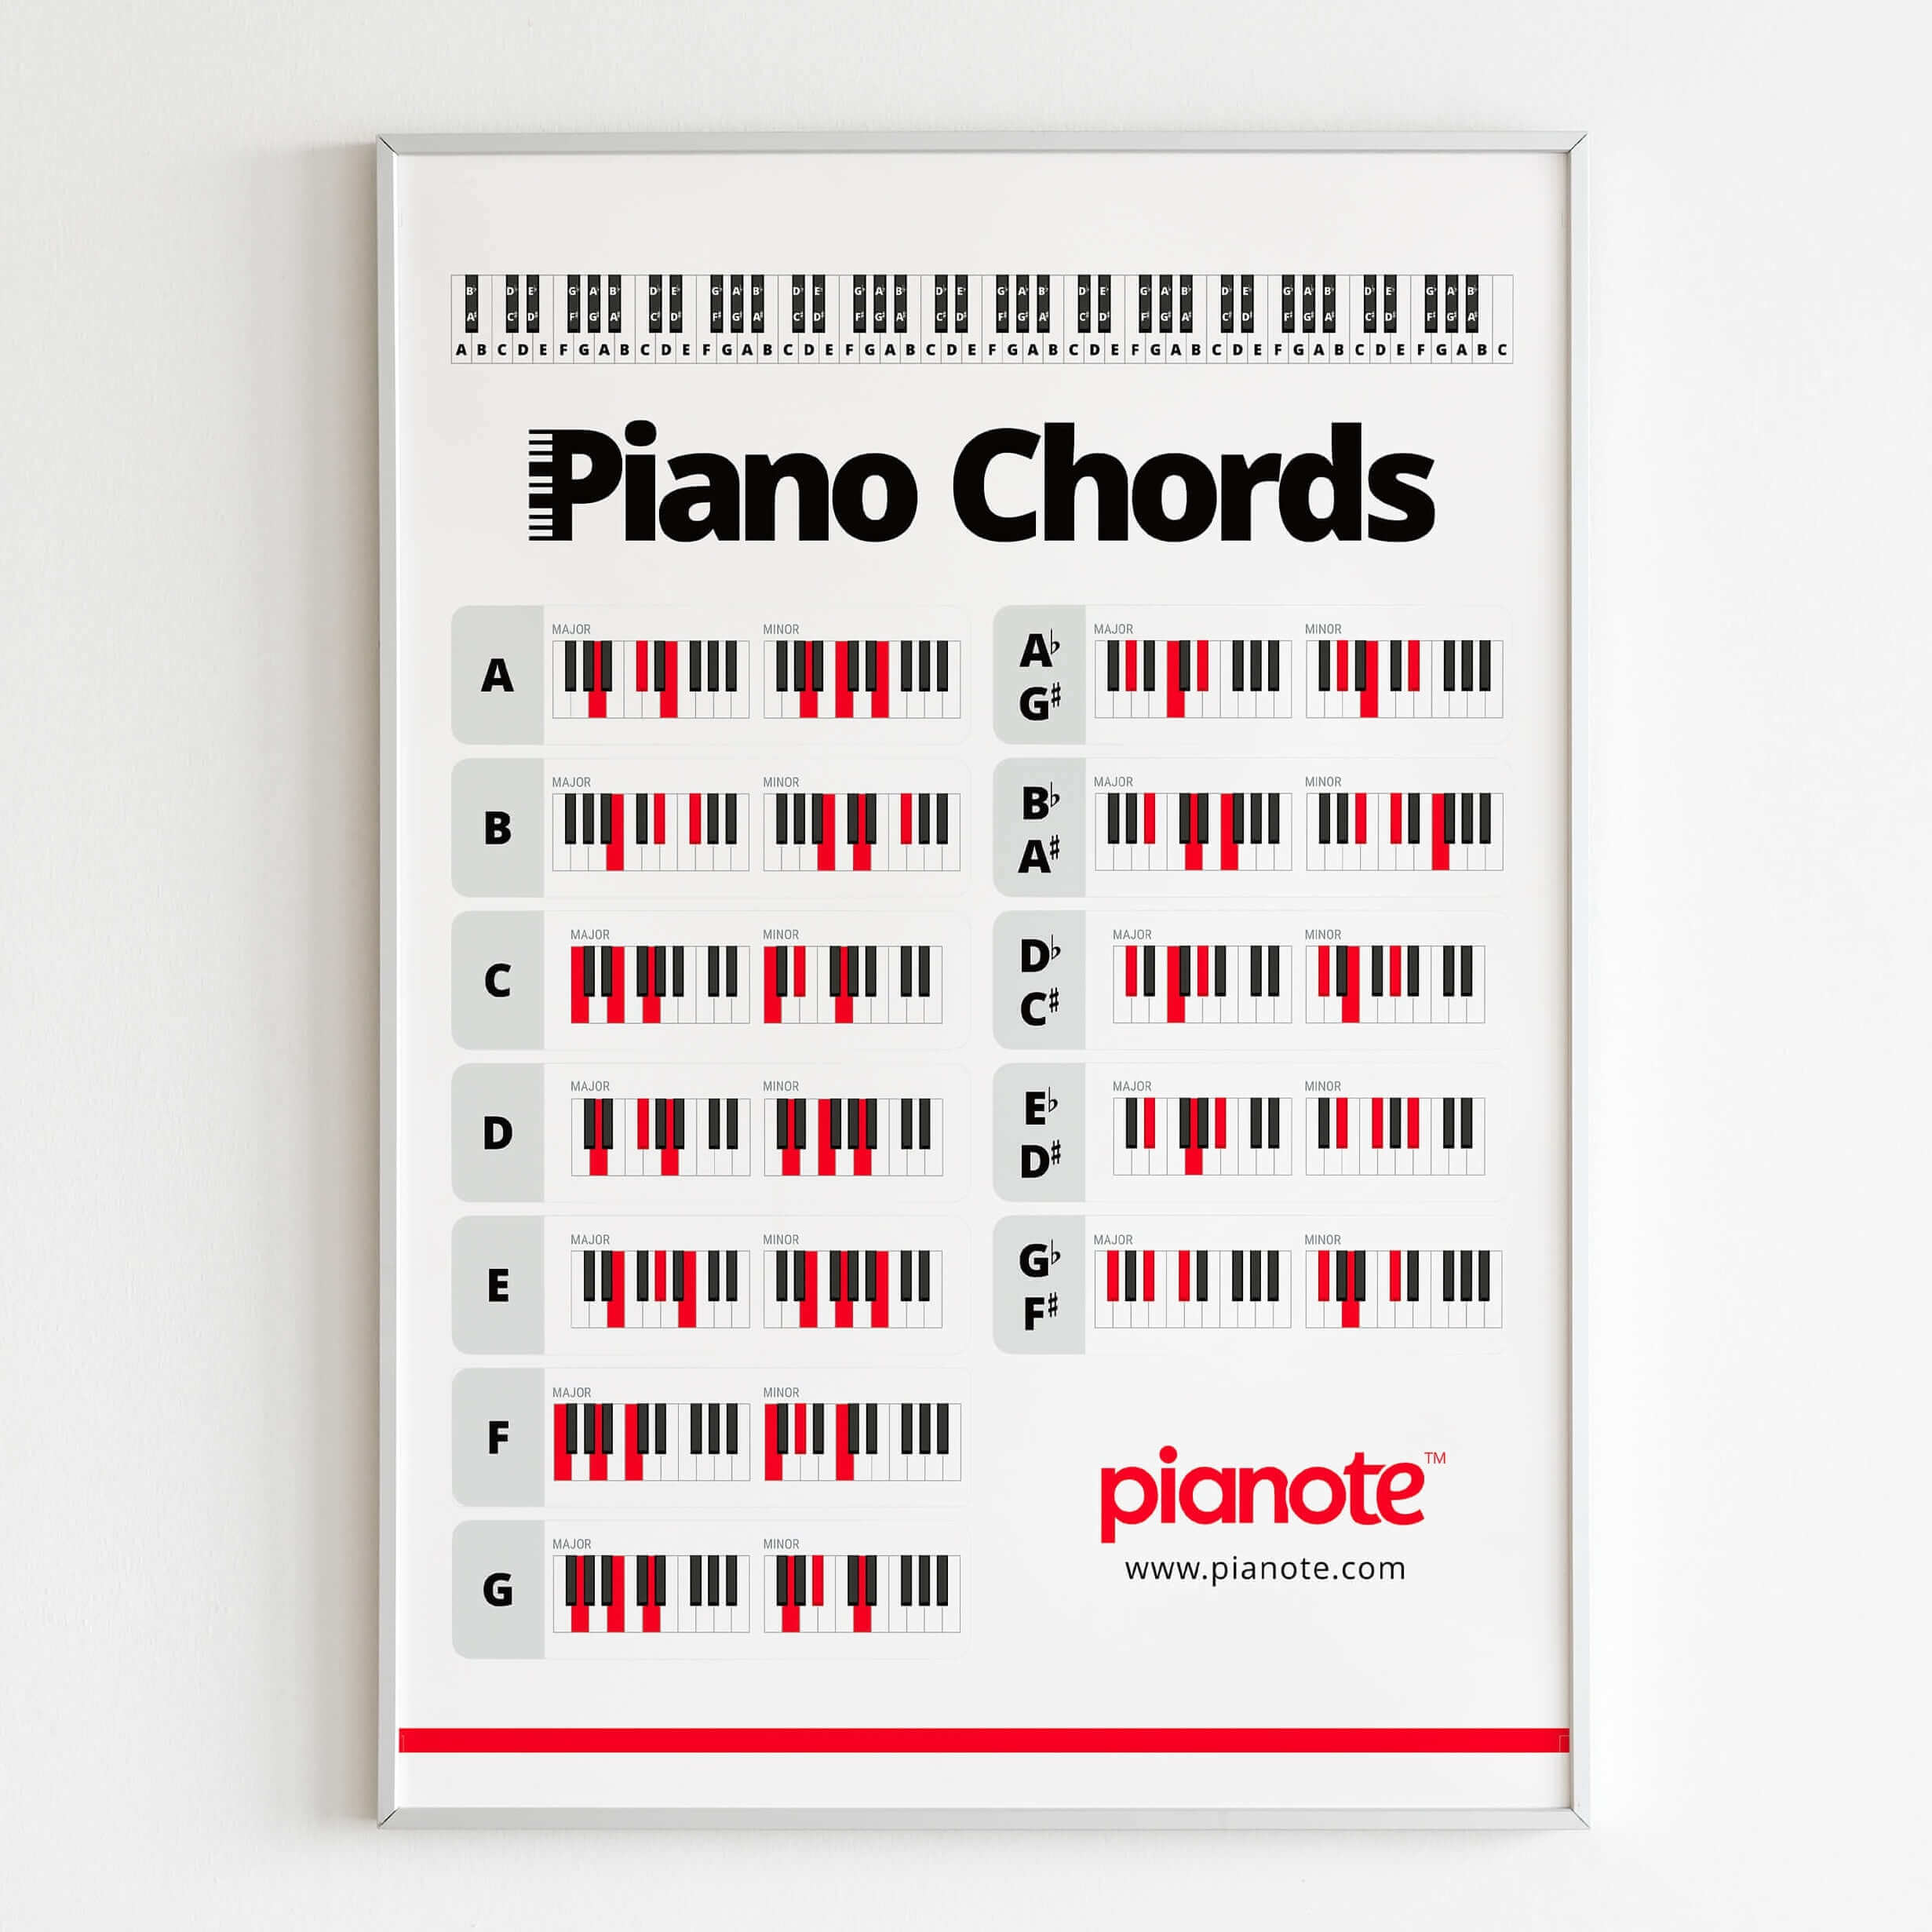 Pianote+Chords+Poster